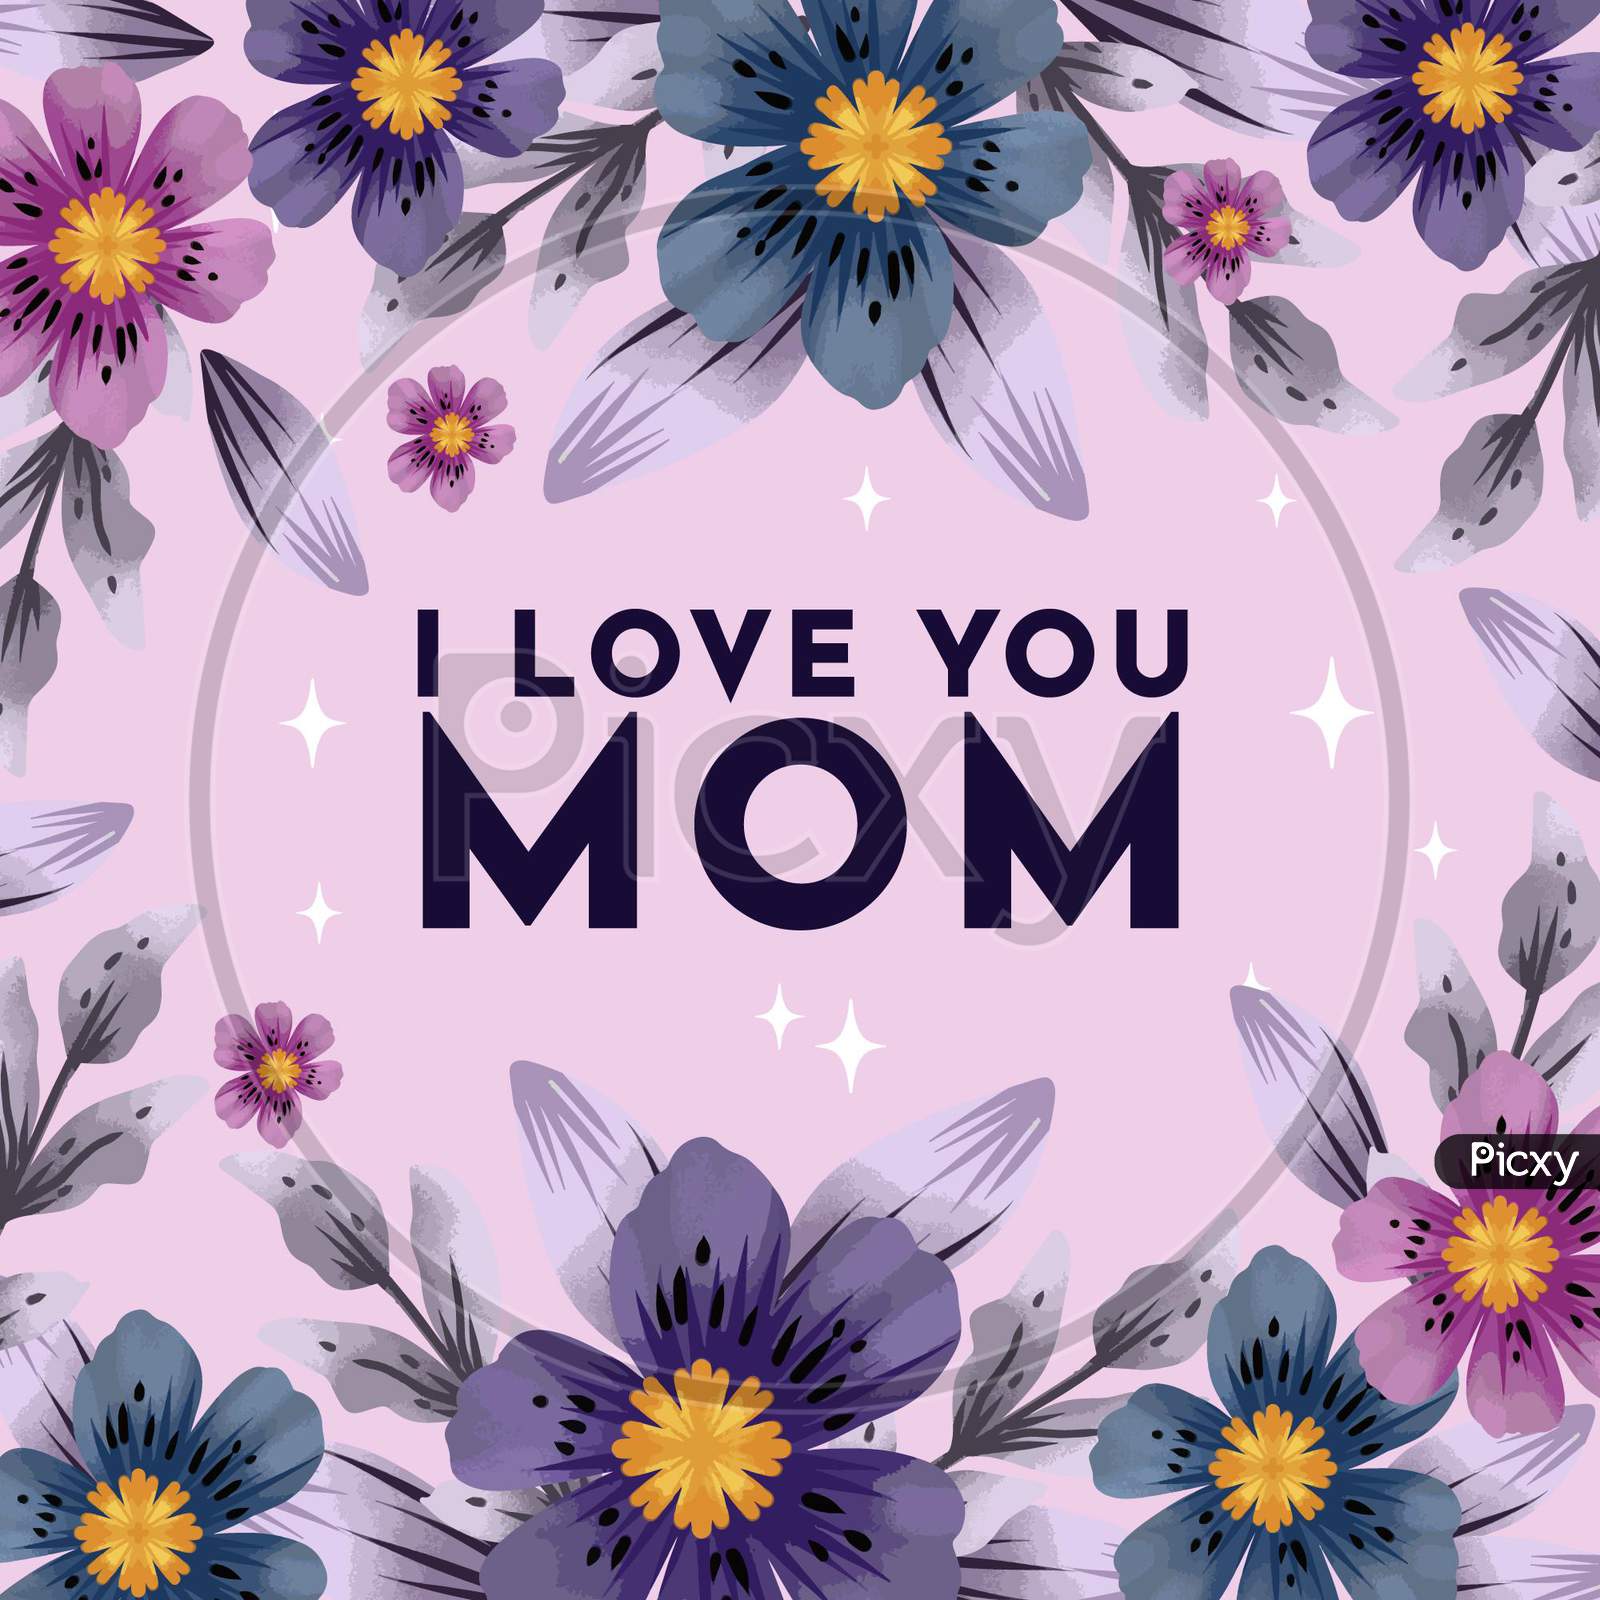 Mother's Day  I Love You Mom Wishes, Greeting, Banner